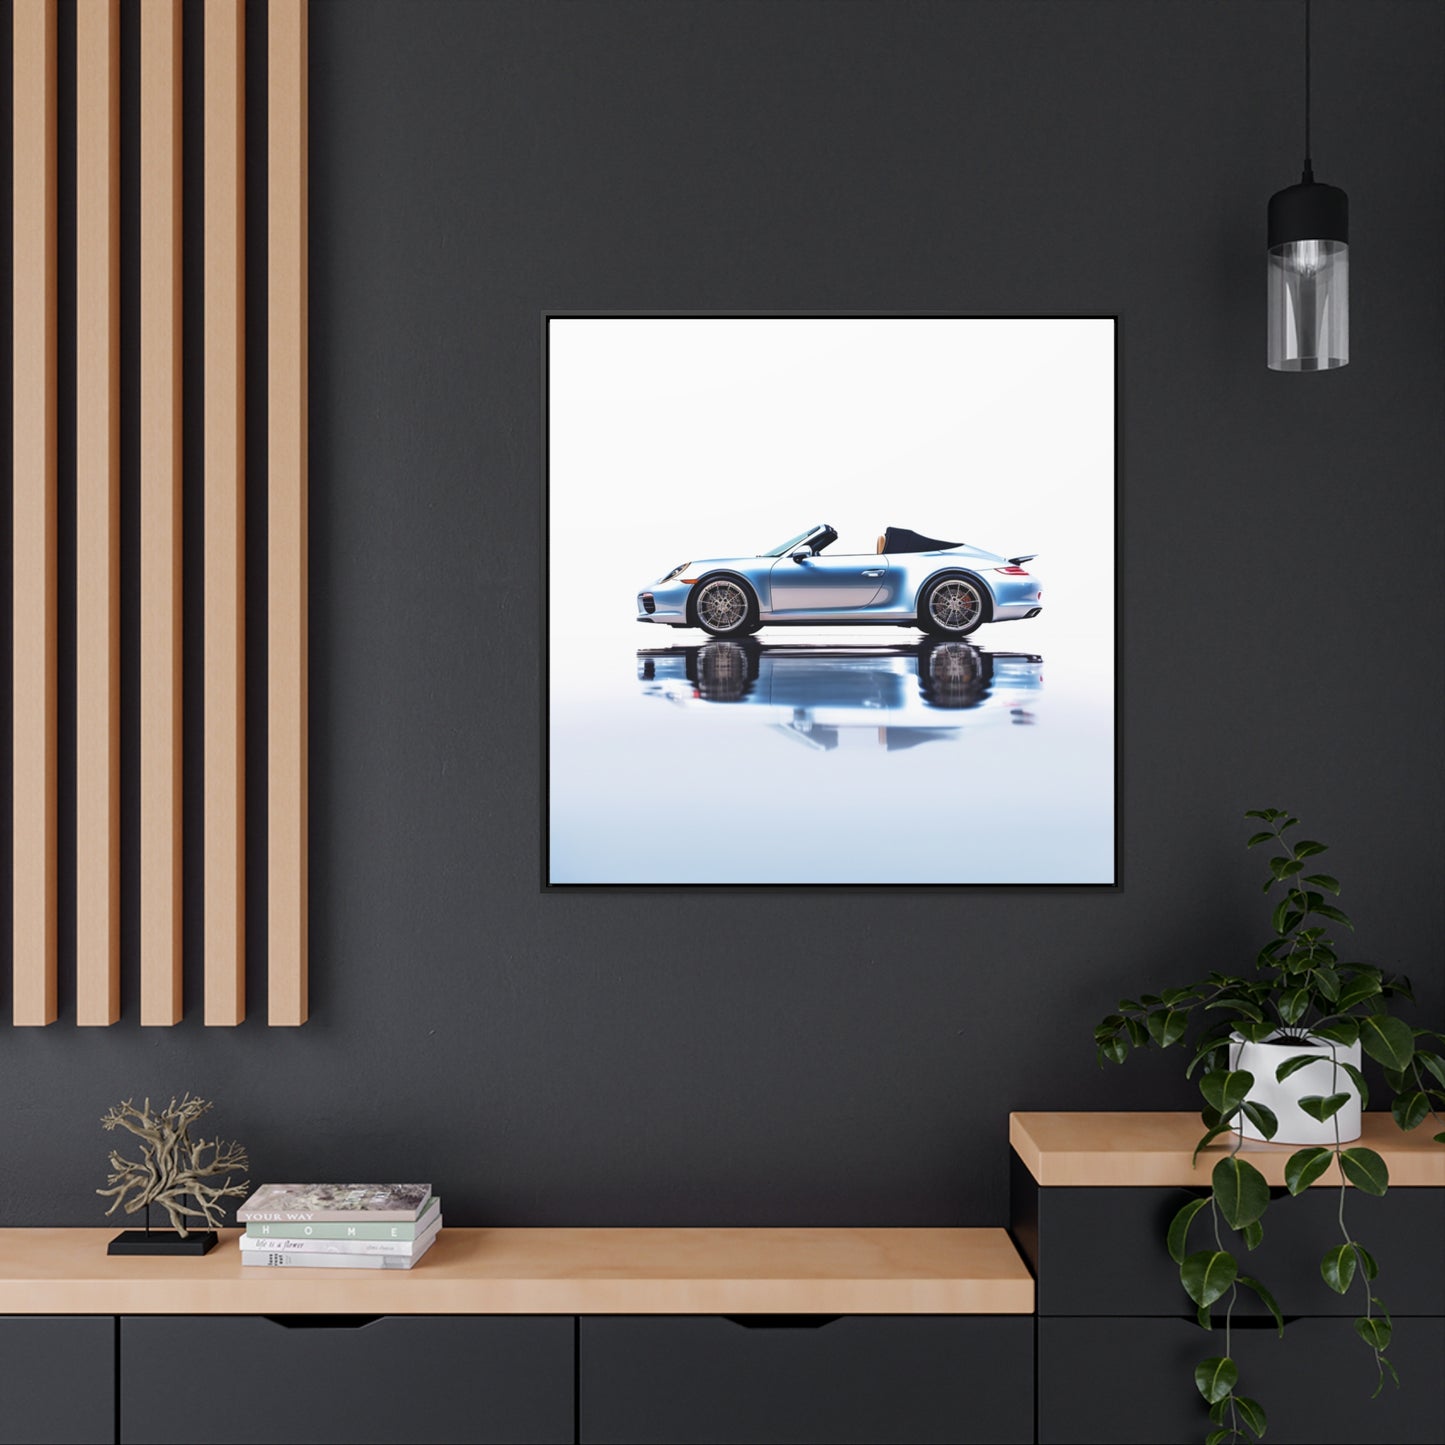 Gallery Canvas Wraps, Square Frame 911 Speedster on water 1